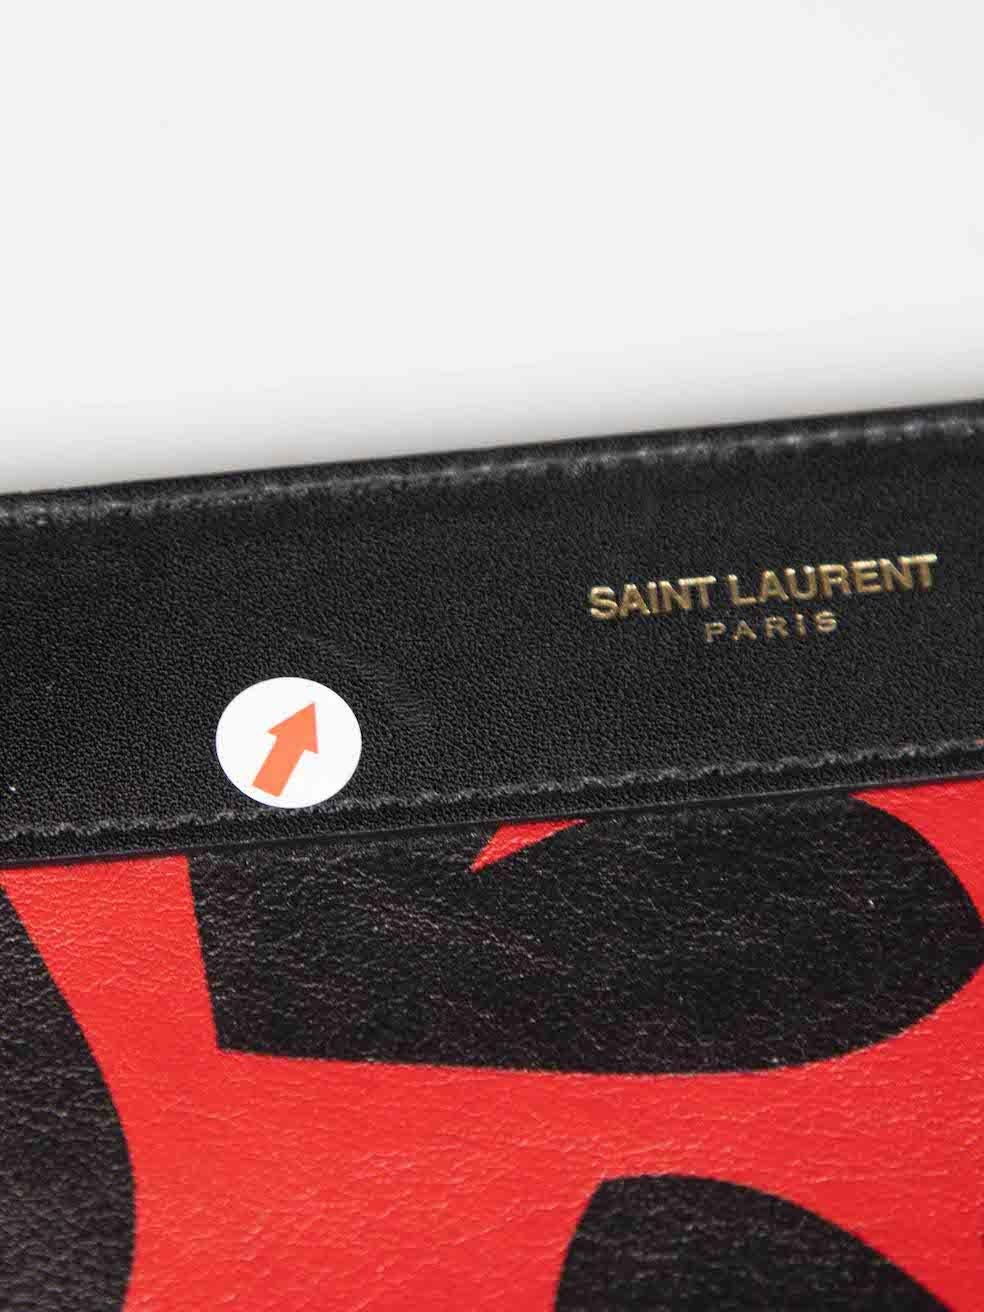 Saint Laurent Heart Printed Leather Clutch For Sale 2